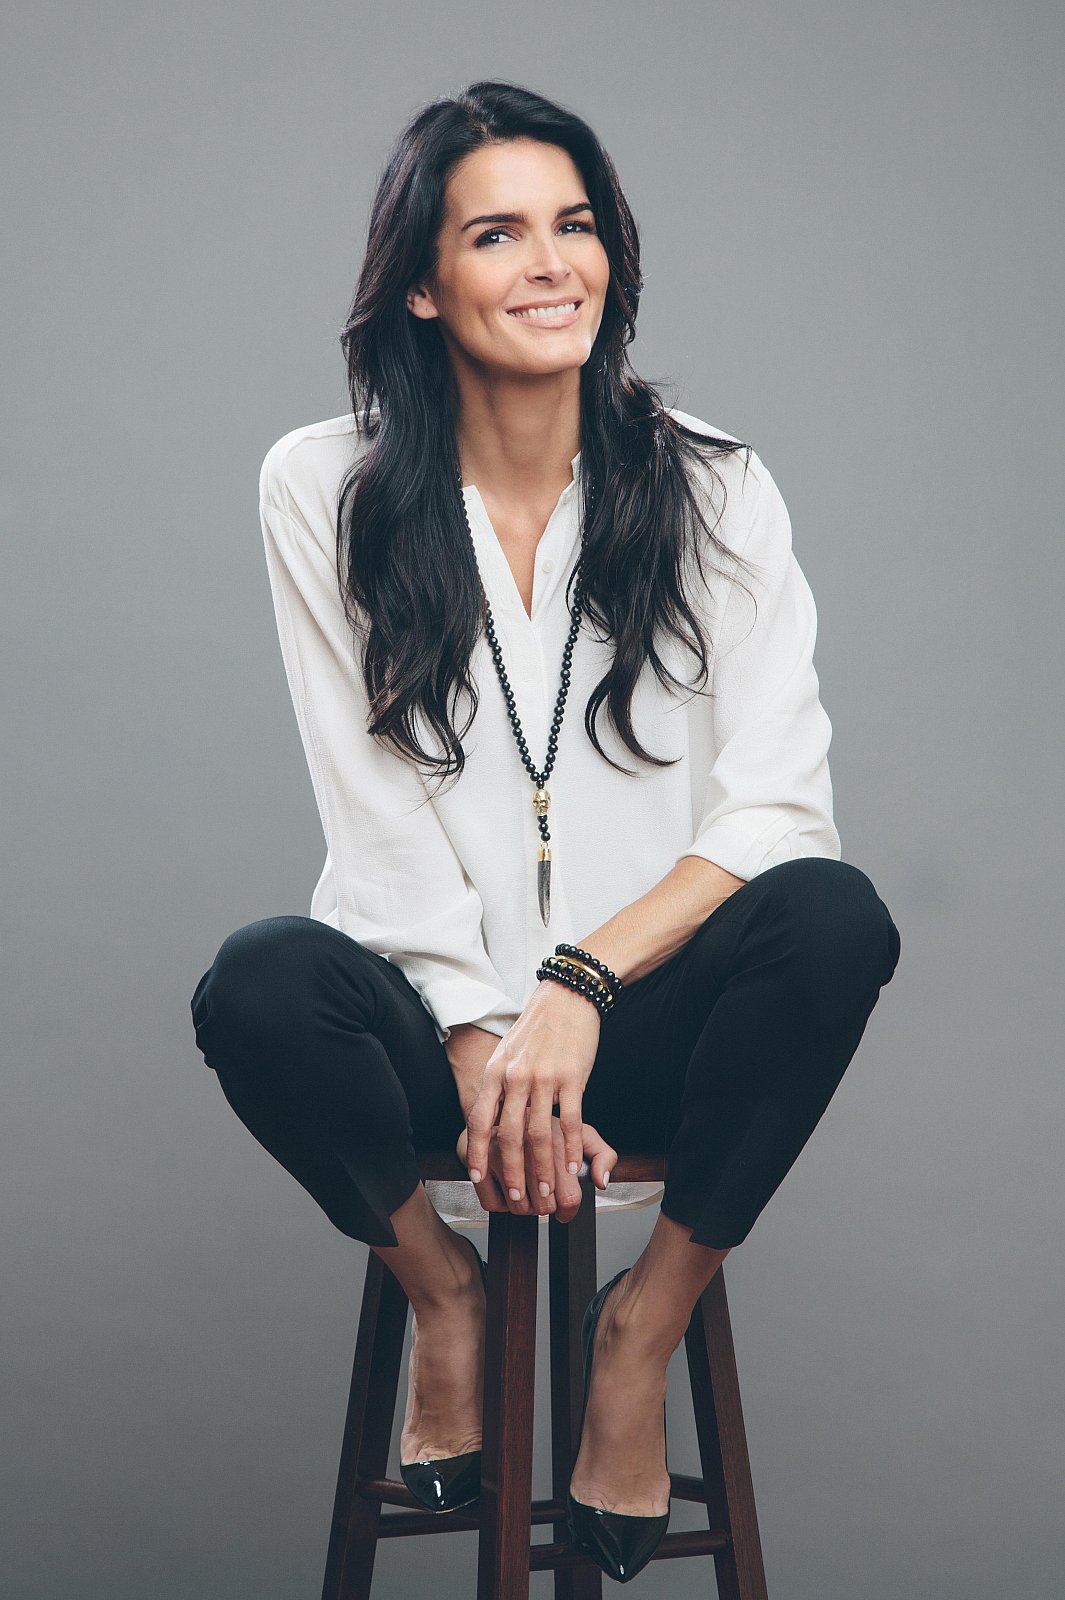 Actress Angie Harmon Launches ‘X Red Earth’ Jewelry Collection